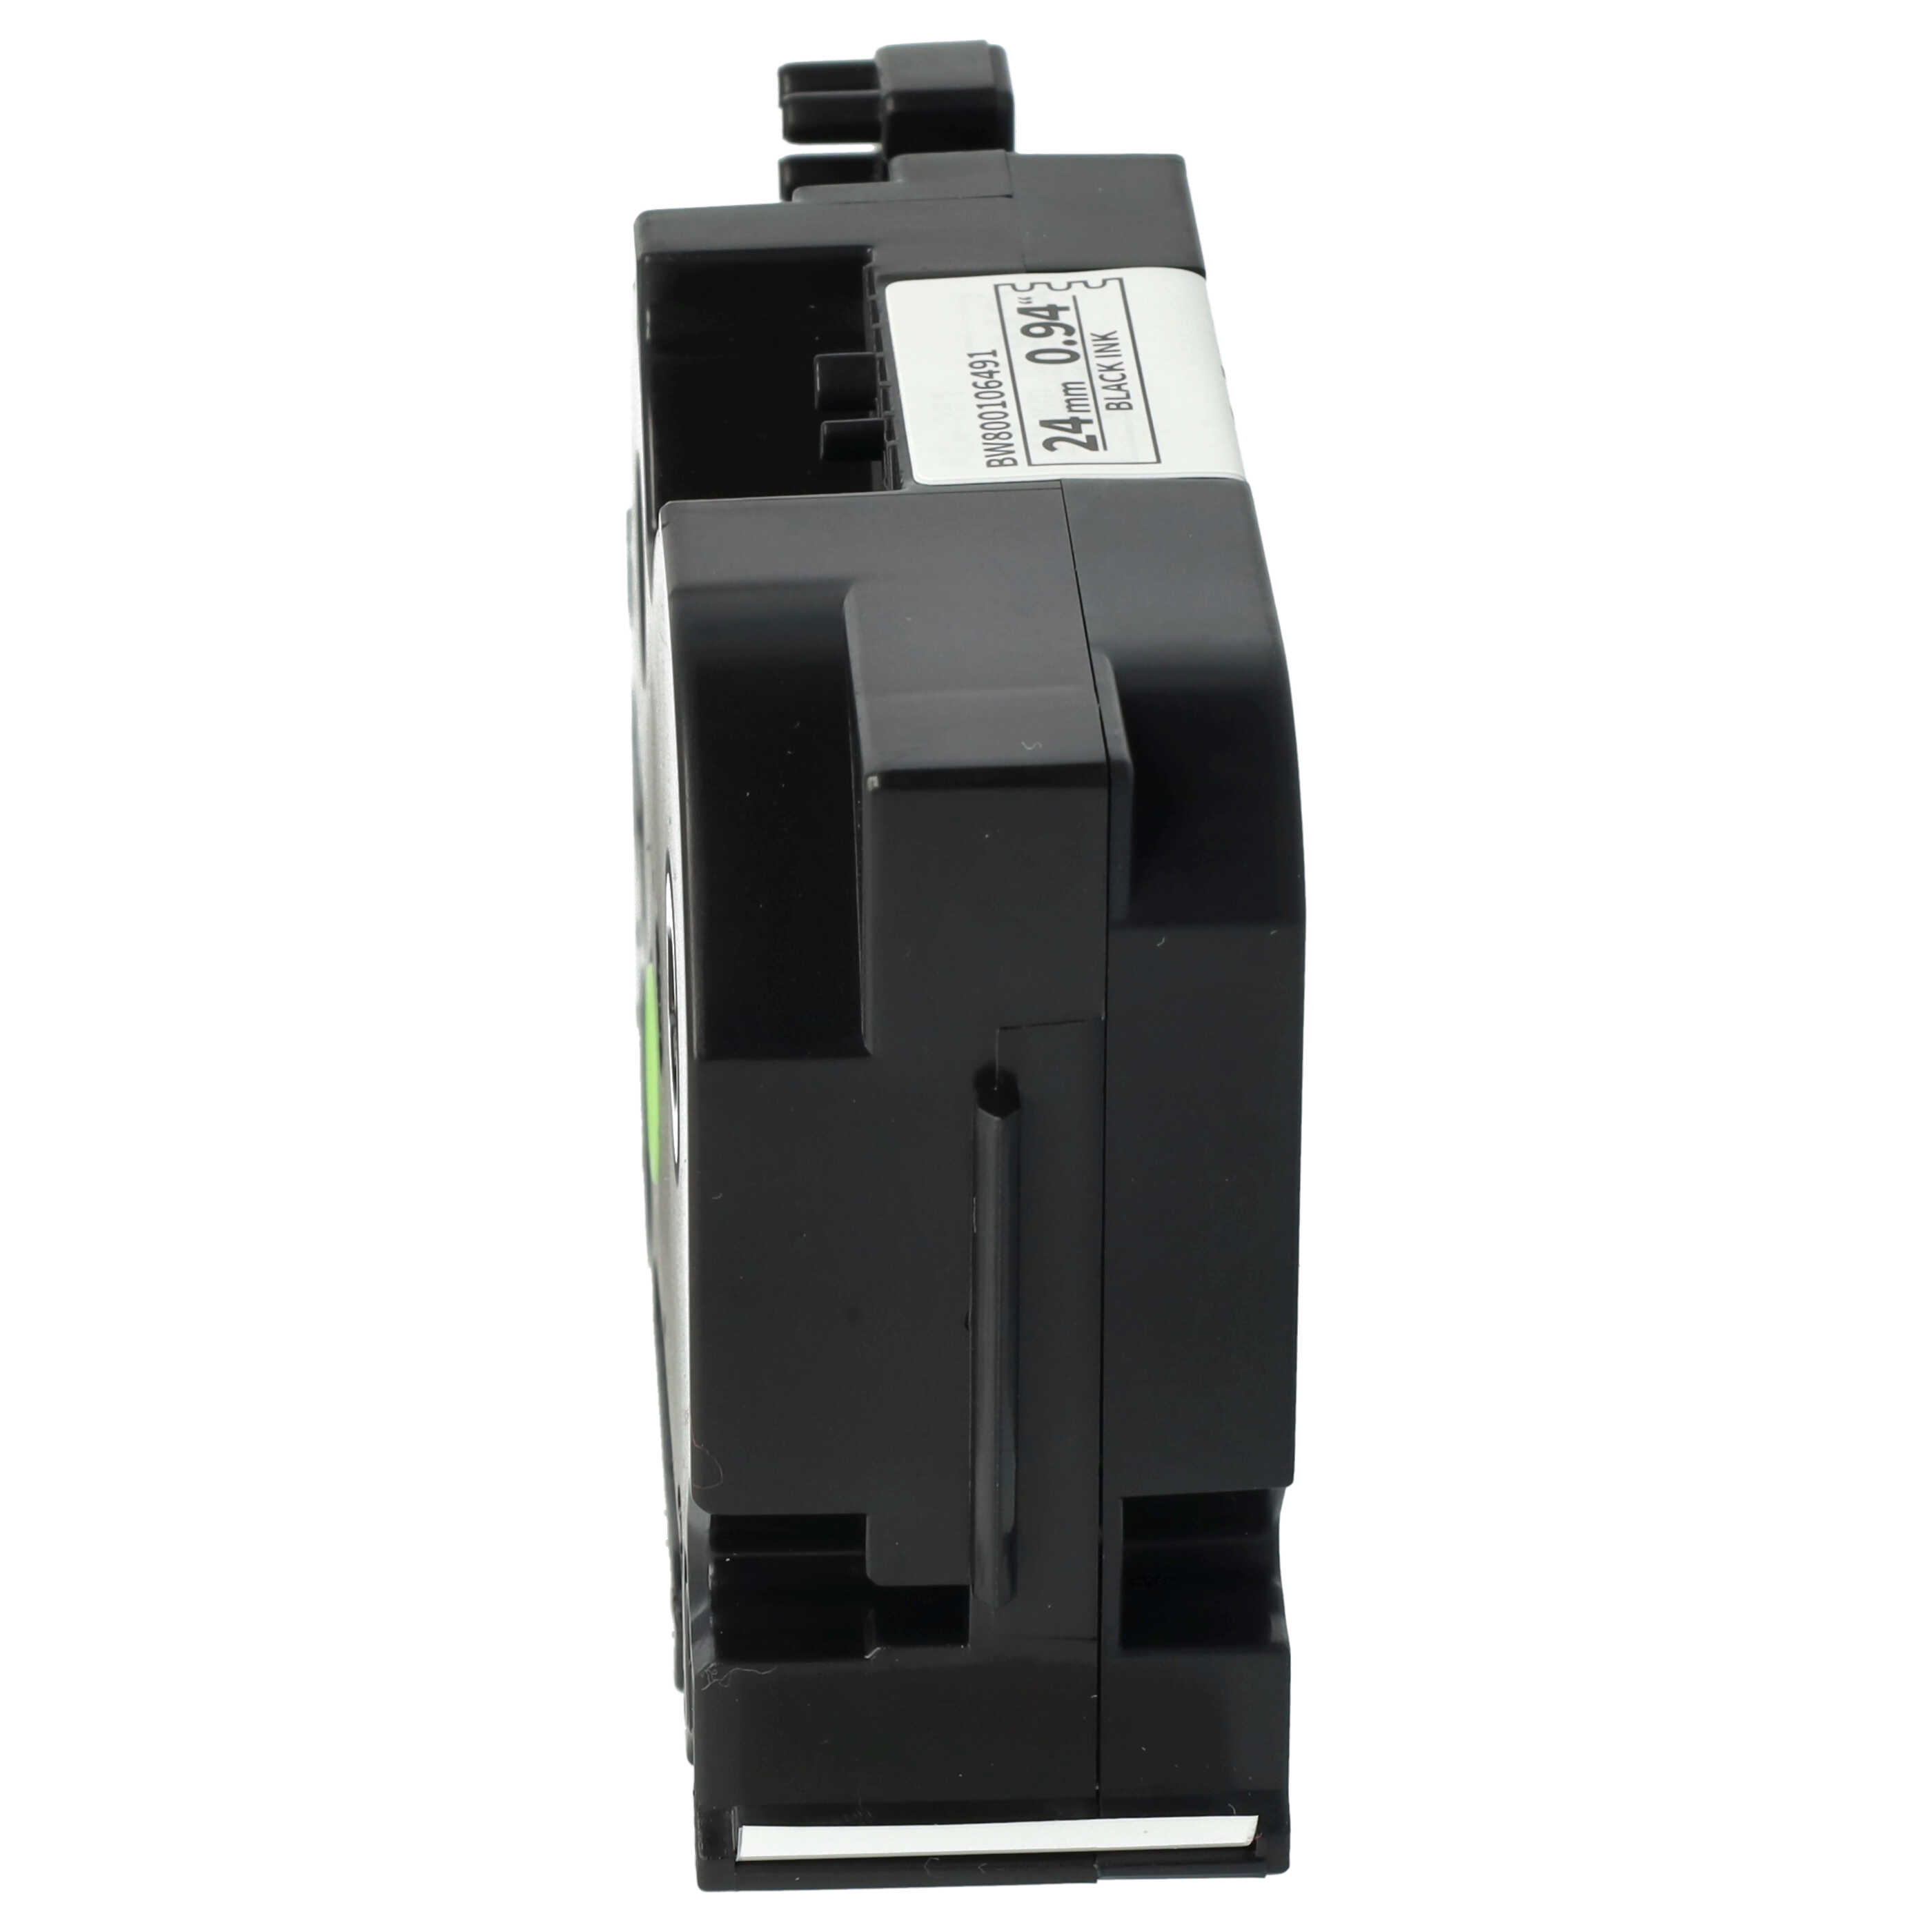 5x Label Tape as Replacement for Brother TZE-251, TZ-251 - 24 mm Black to White